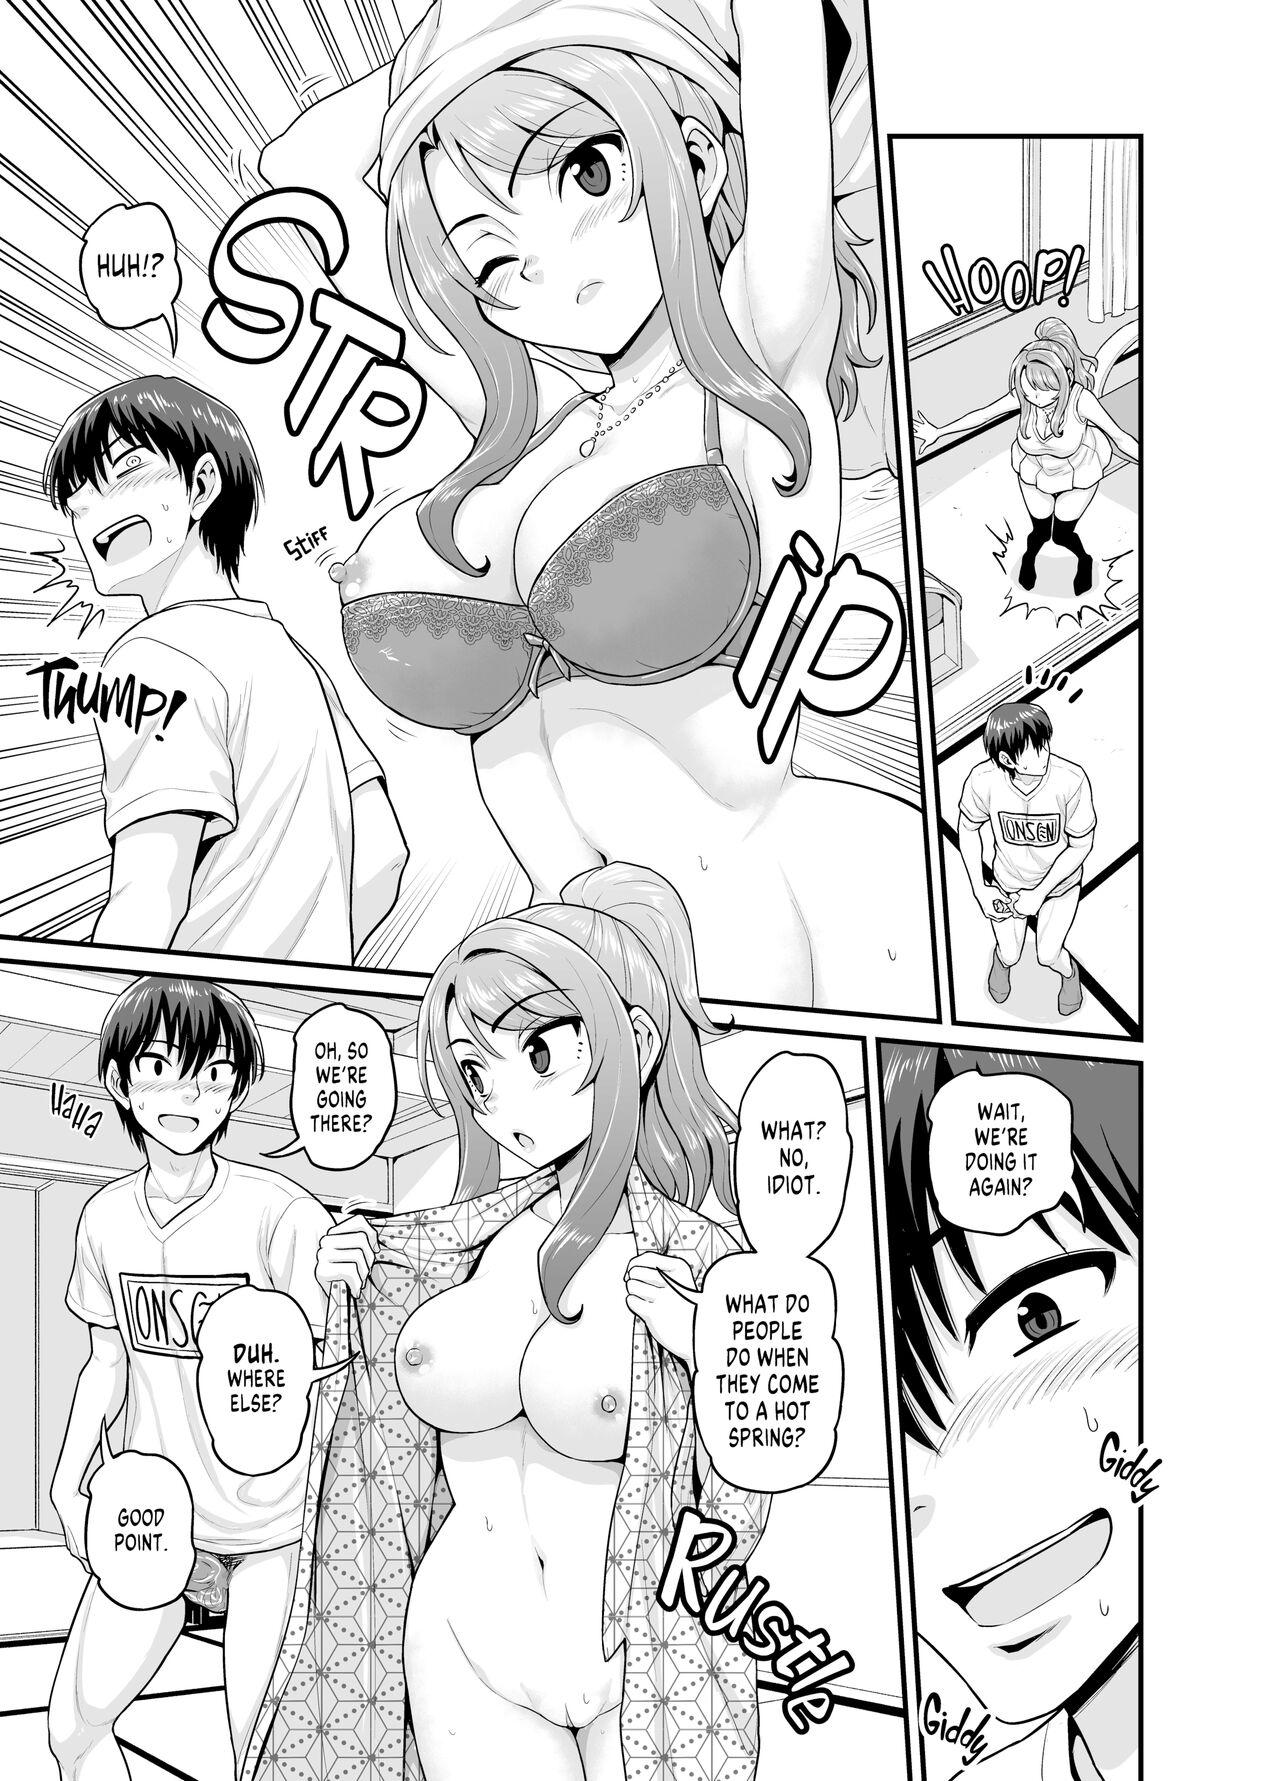 Chudai Getting it On With Your Gaming Buddy at the Hot Spring NTRVer. - Original Female Orgasm - Page 8